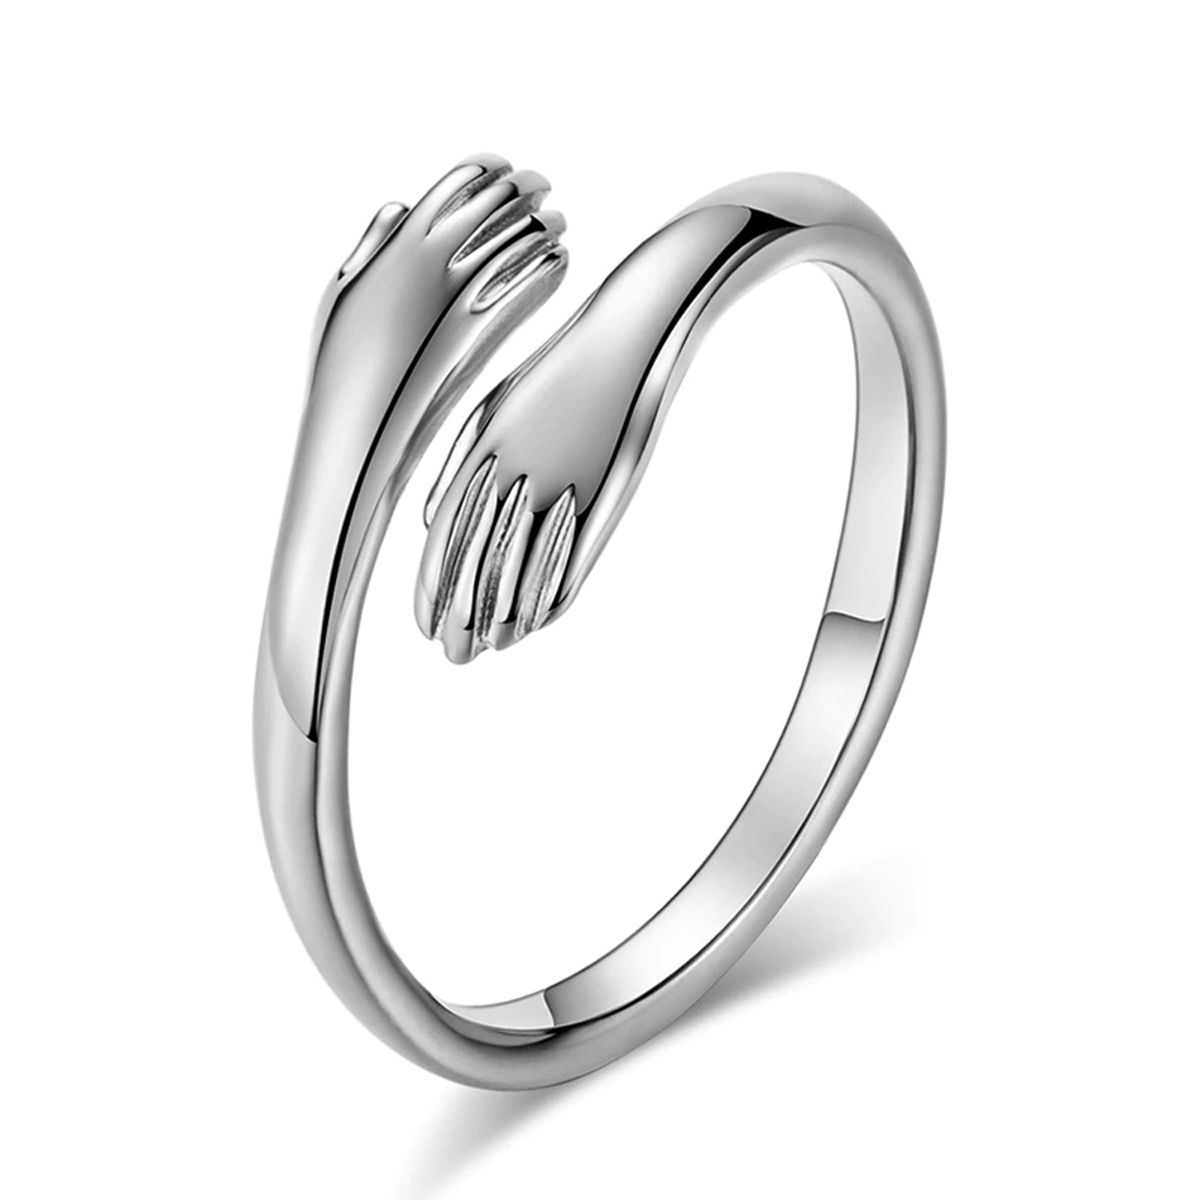 Sterling Silver Rings India-Silver Men's Rings |Silver Jewelry